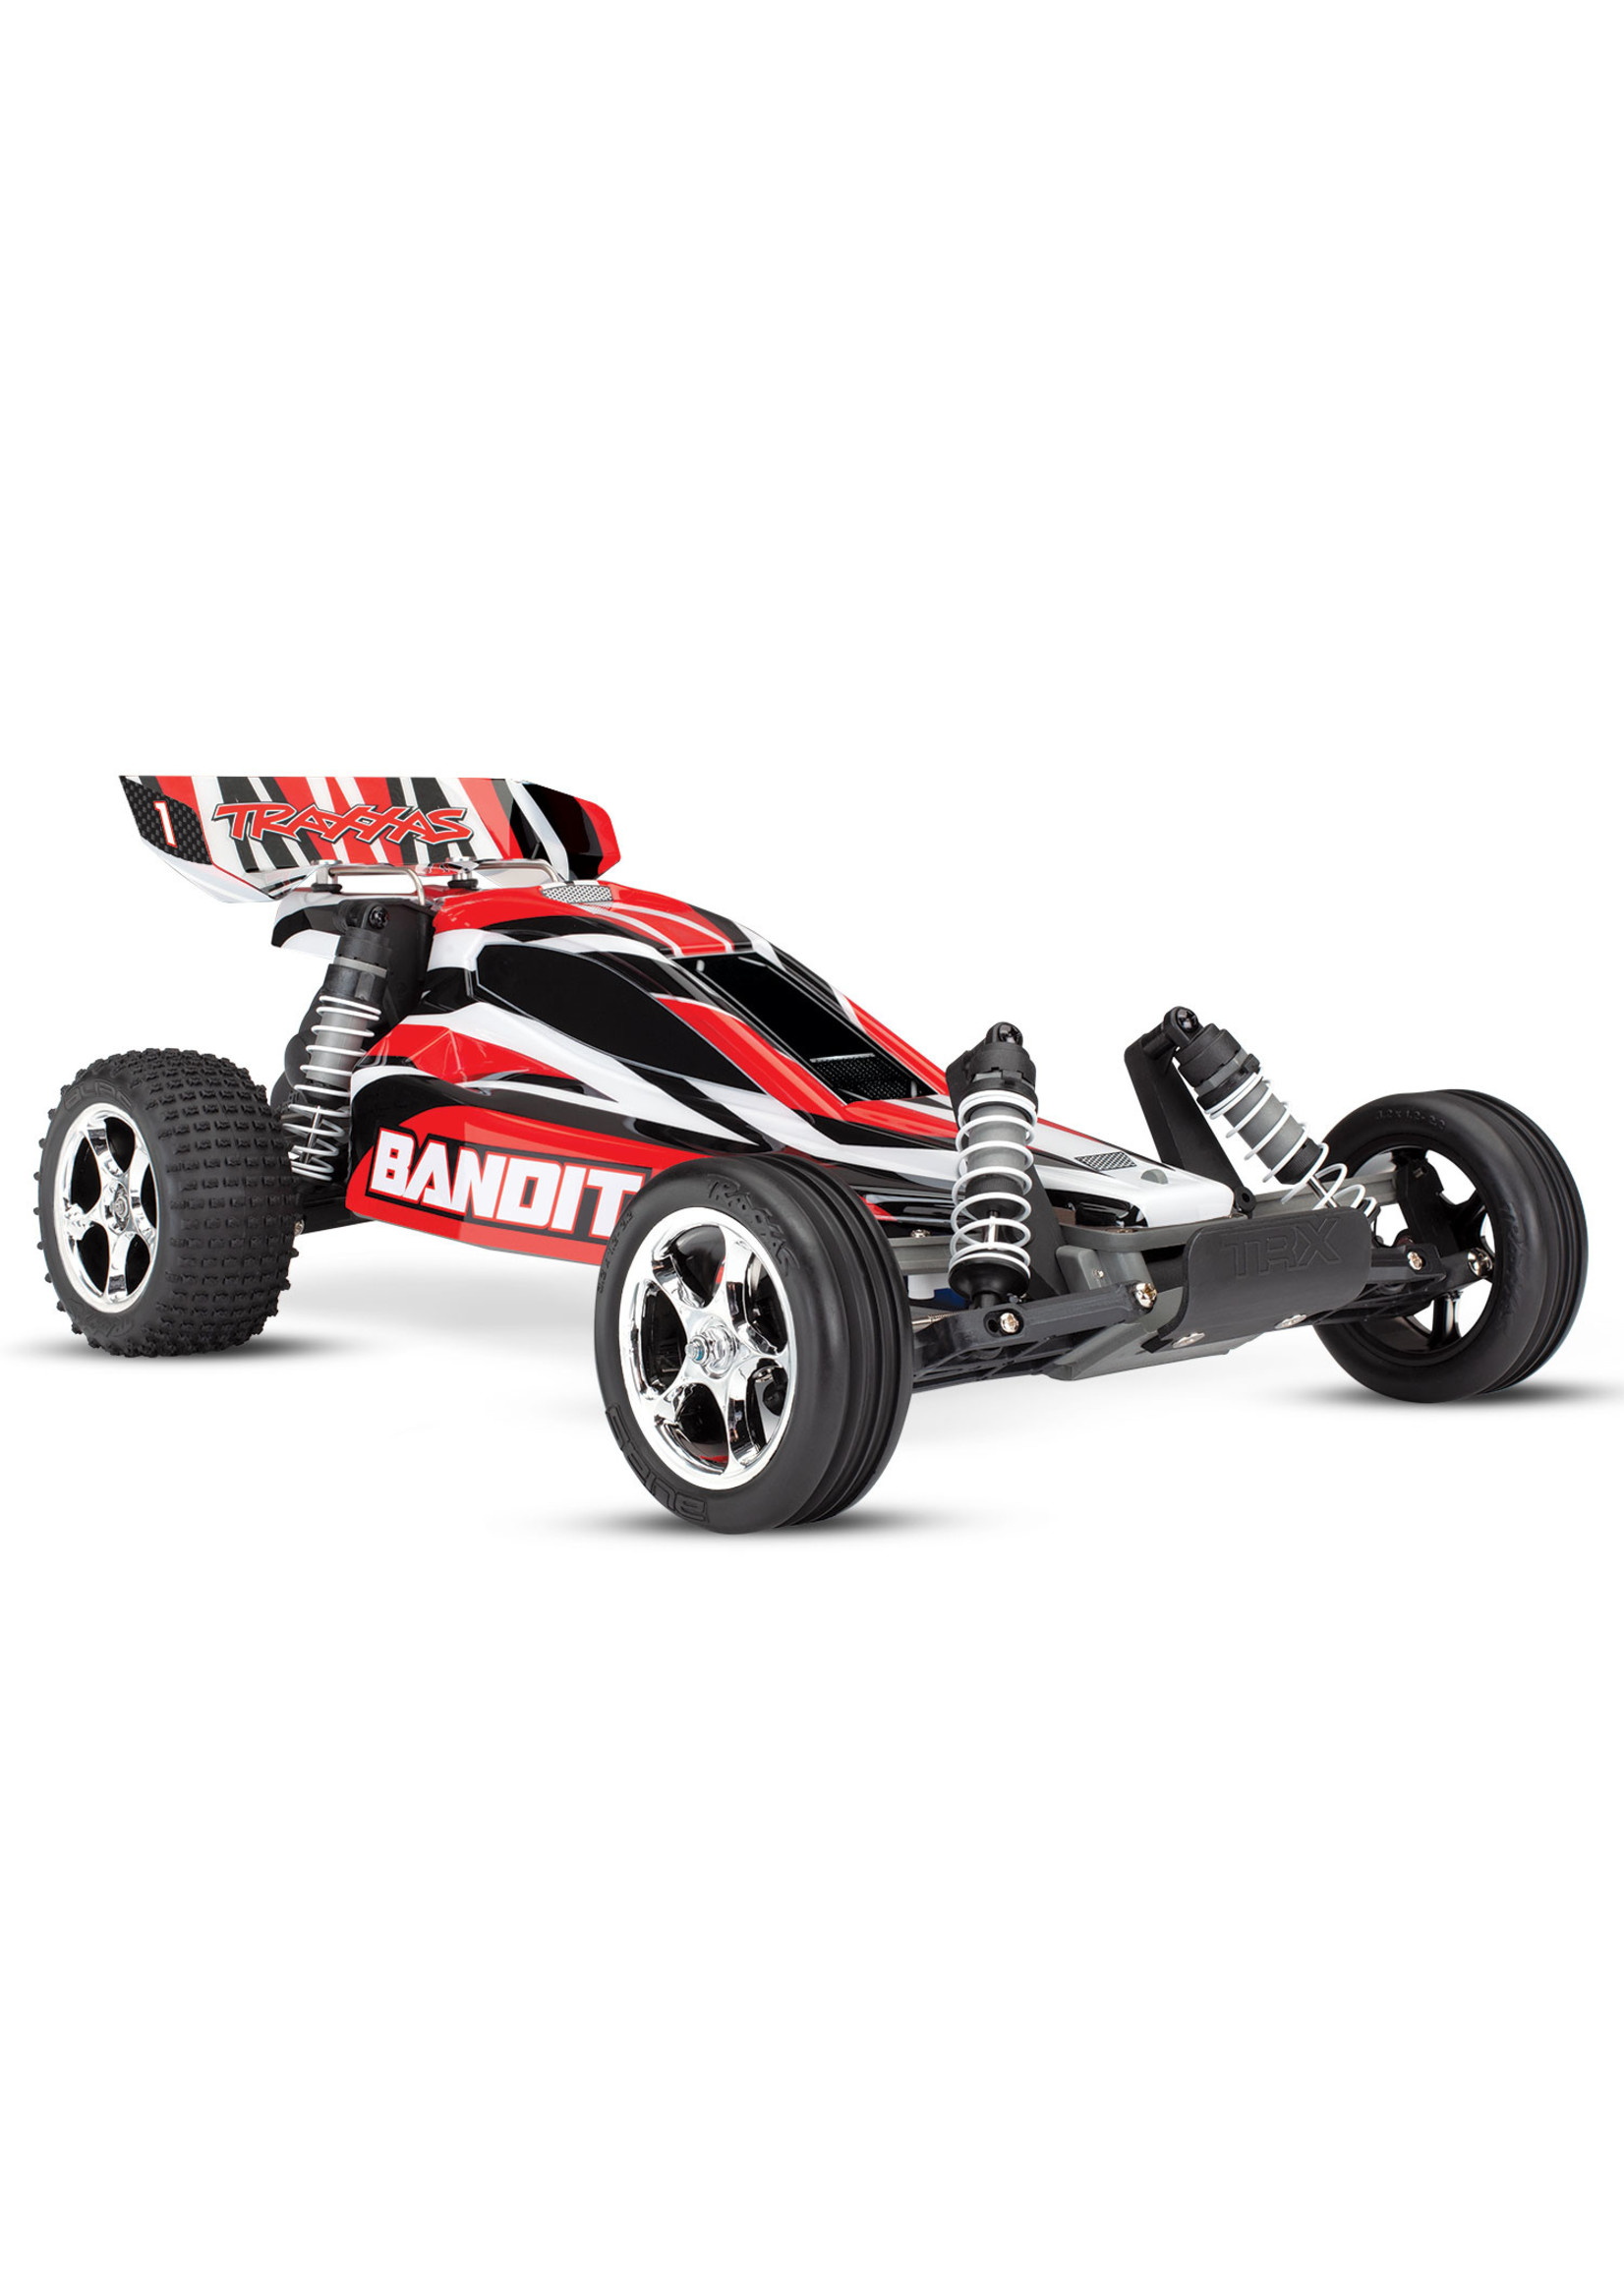 Traxxas 1/10 Bandit XL-5 Extreme Sport Electric Buggy RTR - Red